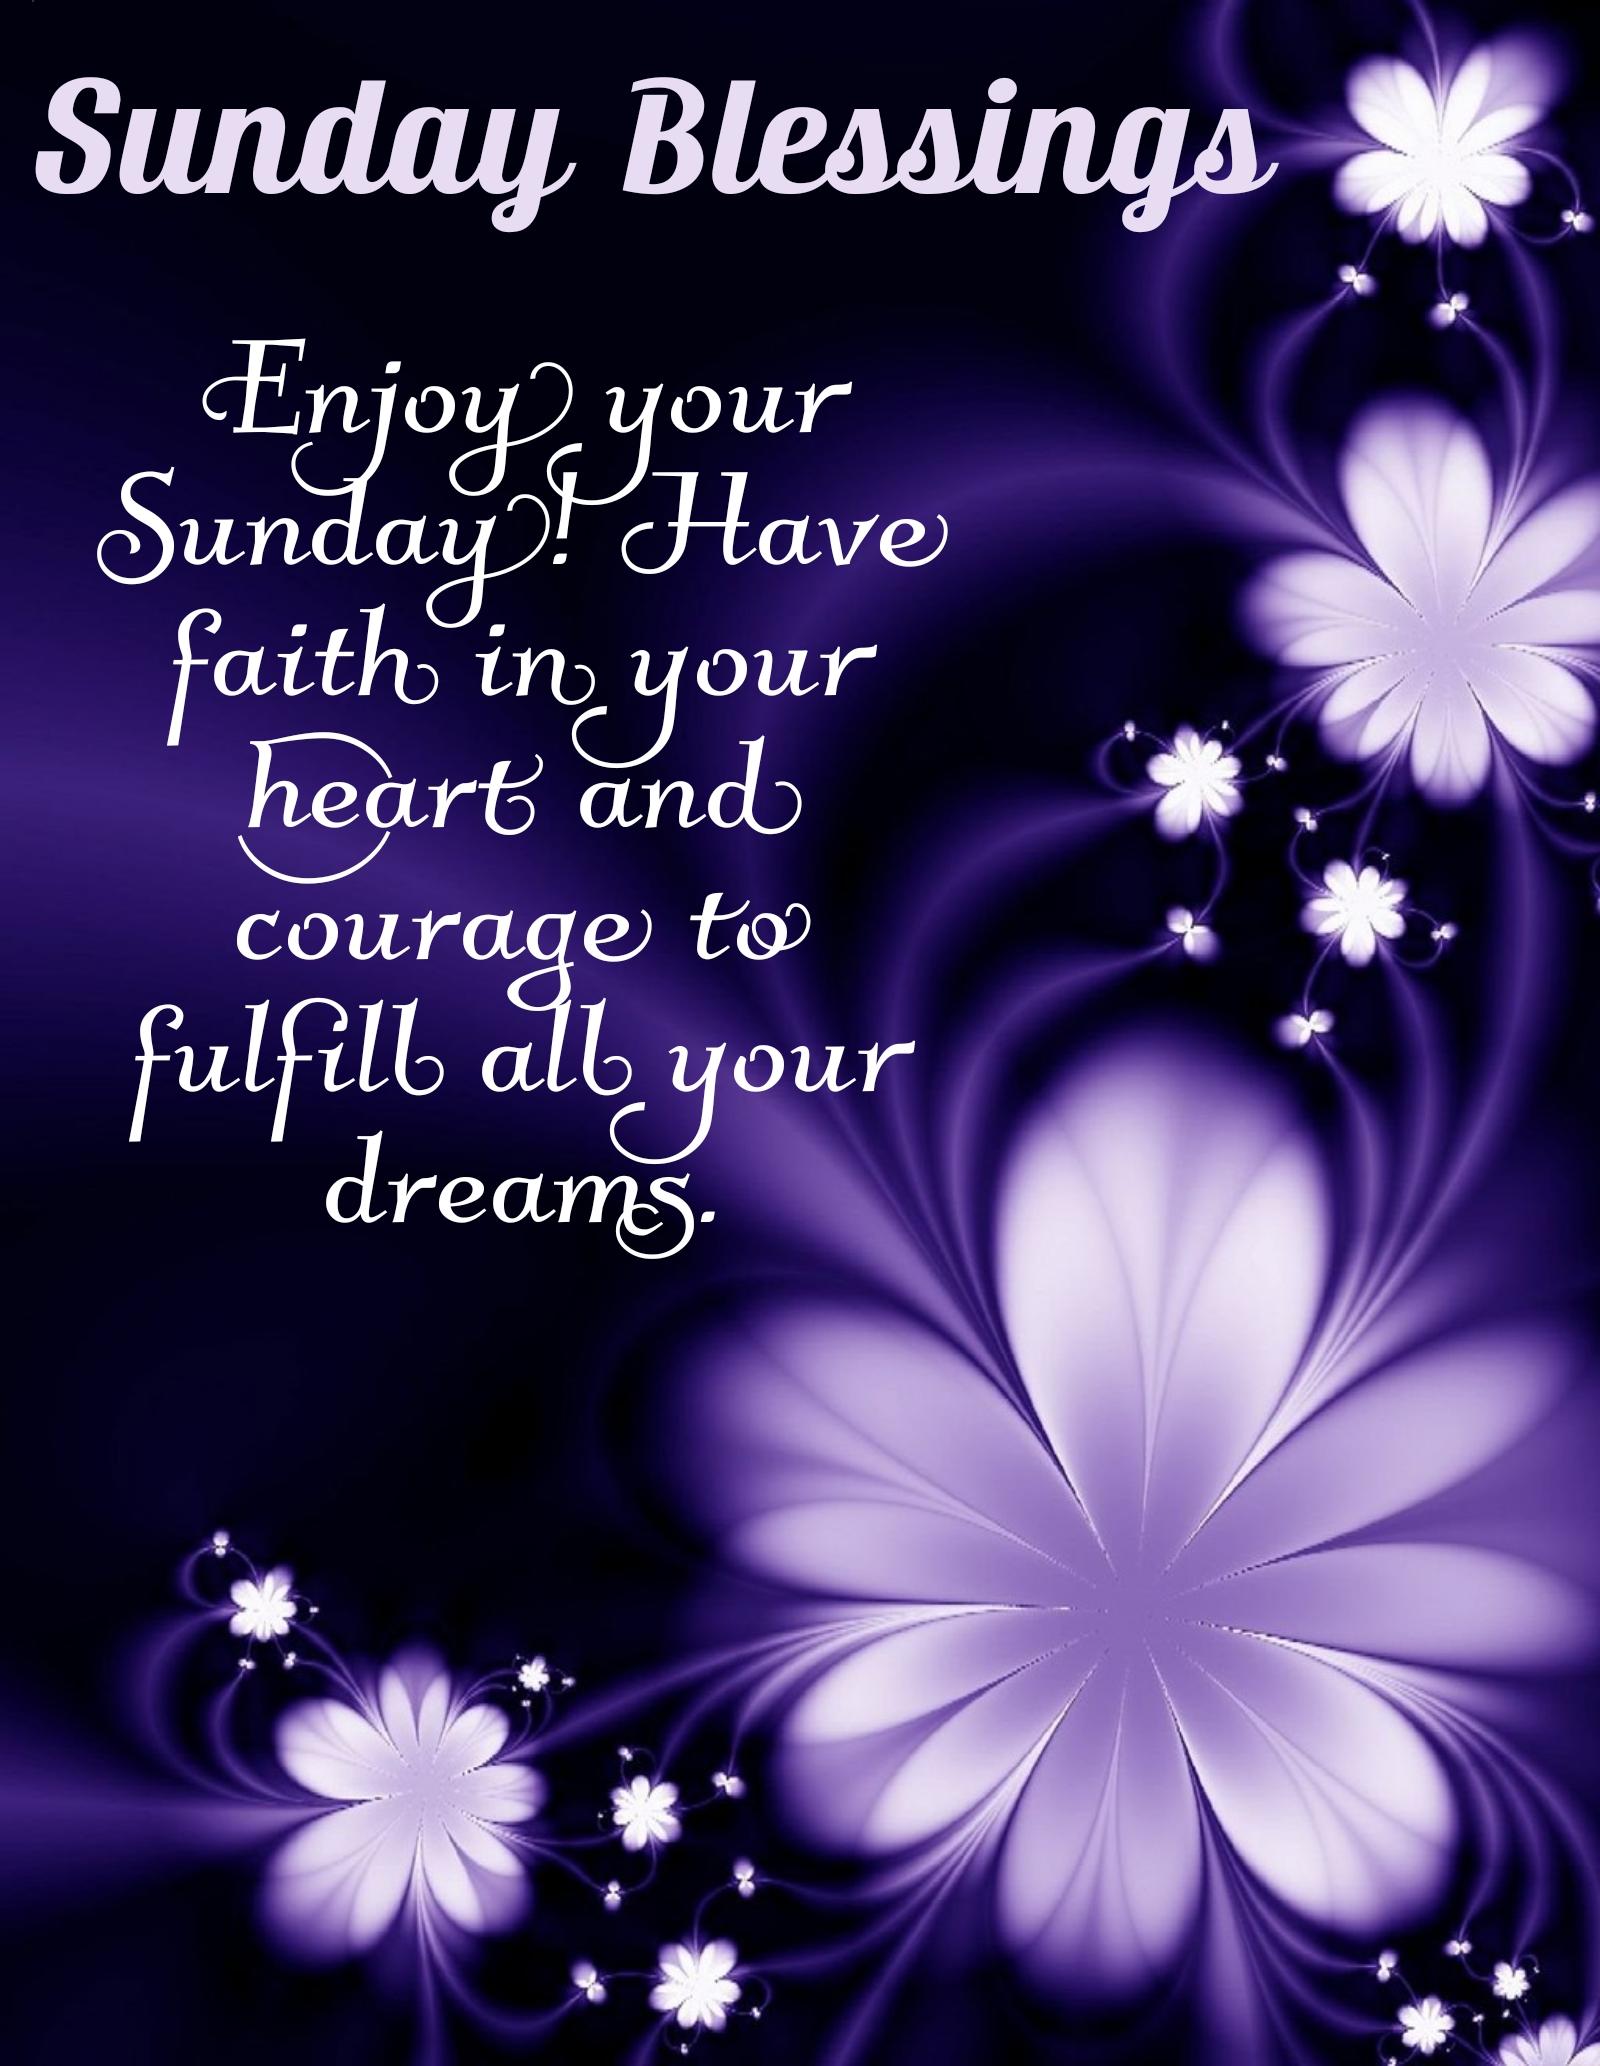 Enjoy your Sunday Have faith in your heart and courage